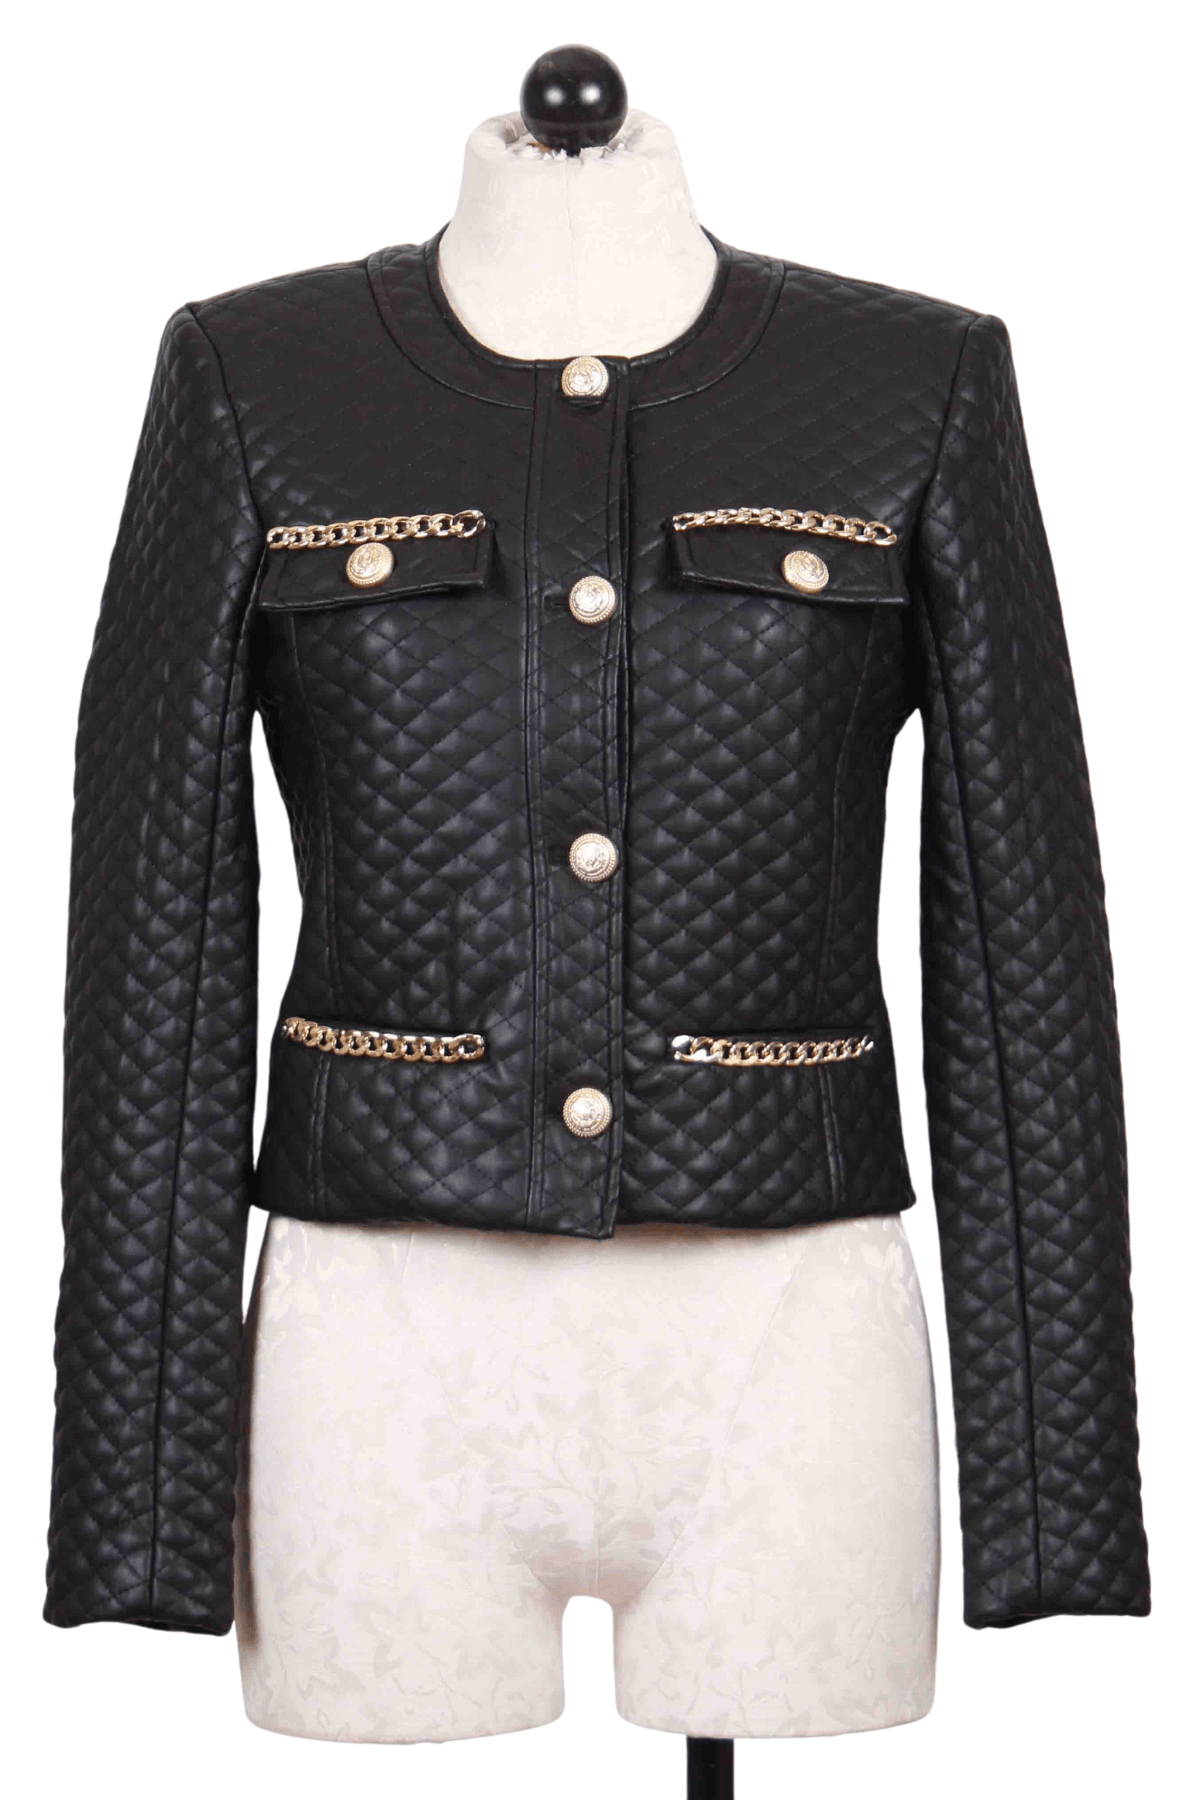 black Quilted Lena Vegan Leather Collarless Jacket by Generation Love